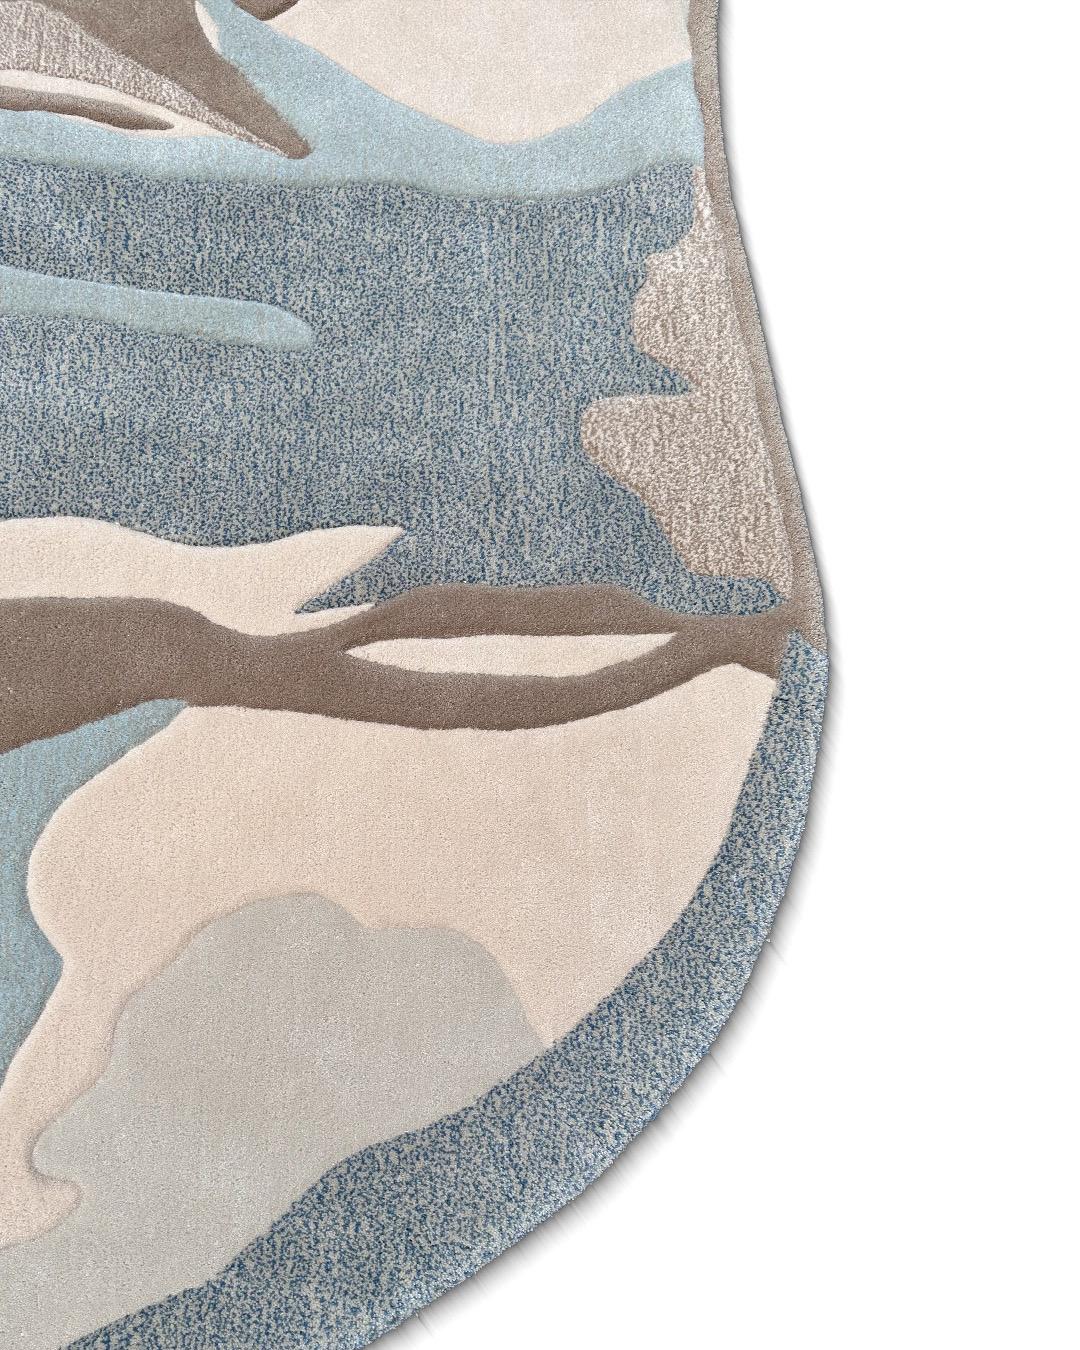 Just in: 'Frozen Lands,' a tufted rug that recalls memories of northeast Greenland beneath ironclad snow. Its colors: a muted blue borrowed from the gaping silence of frozen water, and subtle shards of brown—a testament to the persistent,